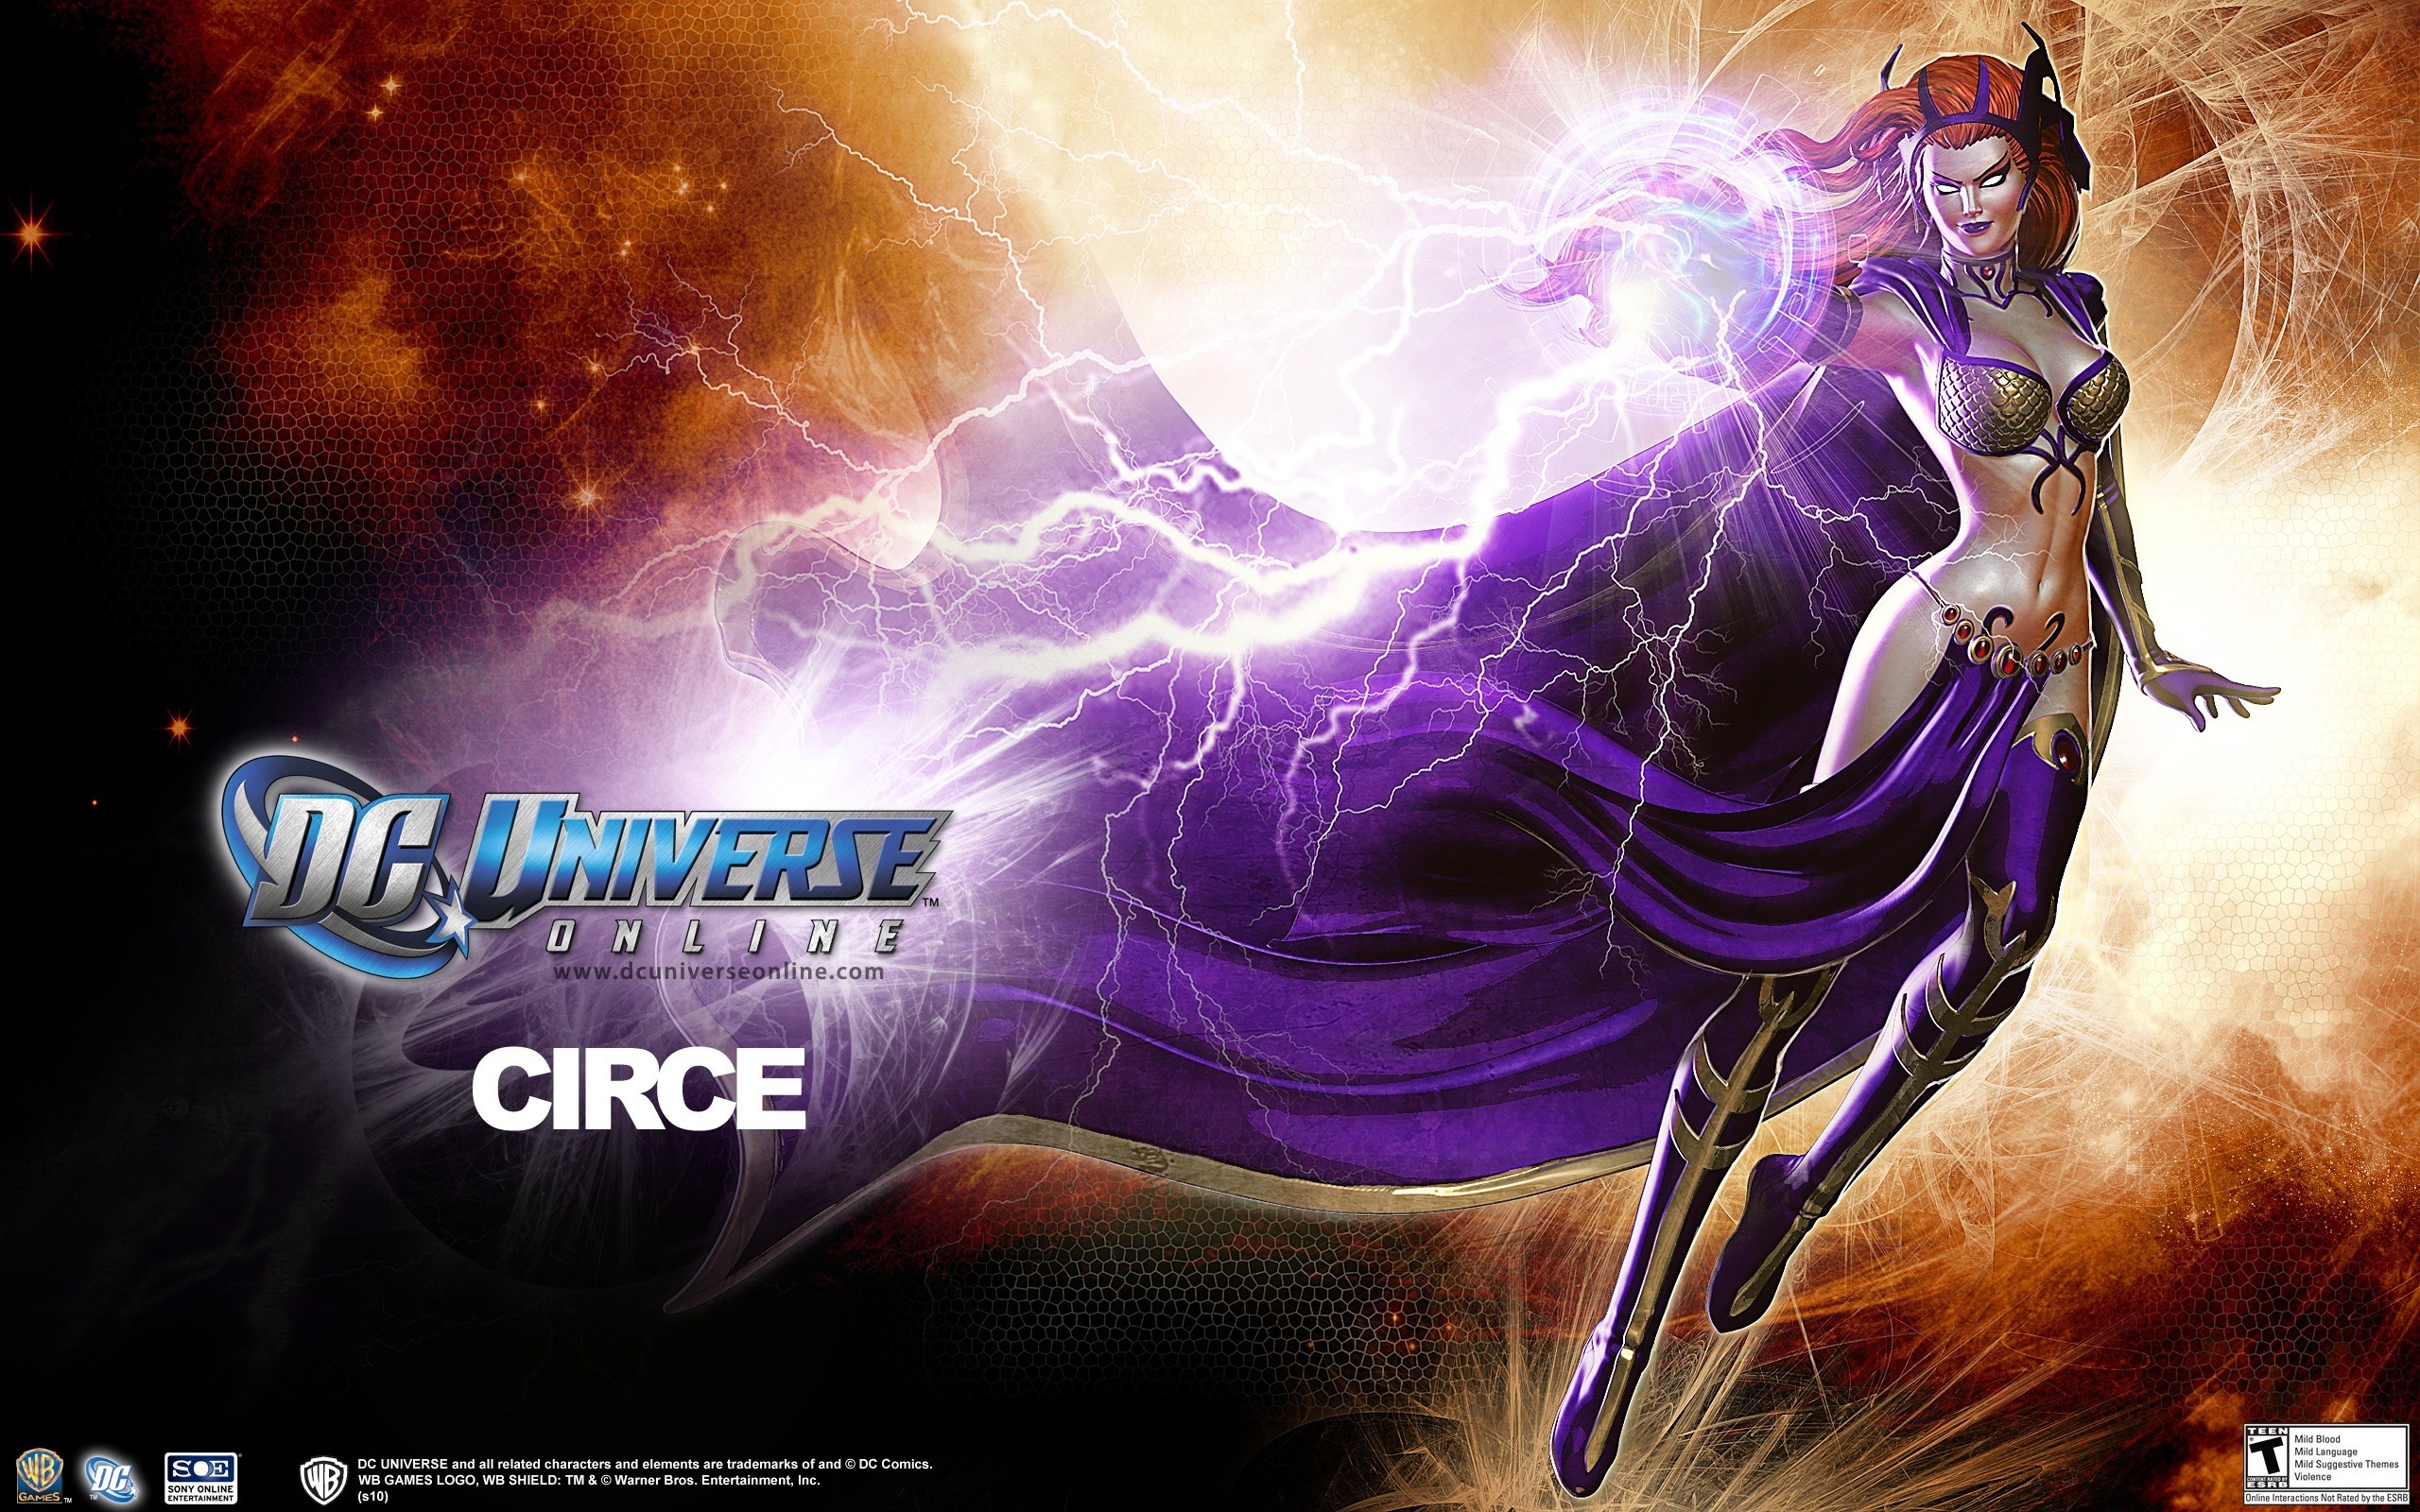 DC Universe Online HD game wallpapers #7 - 2560x1600